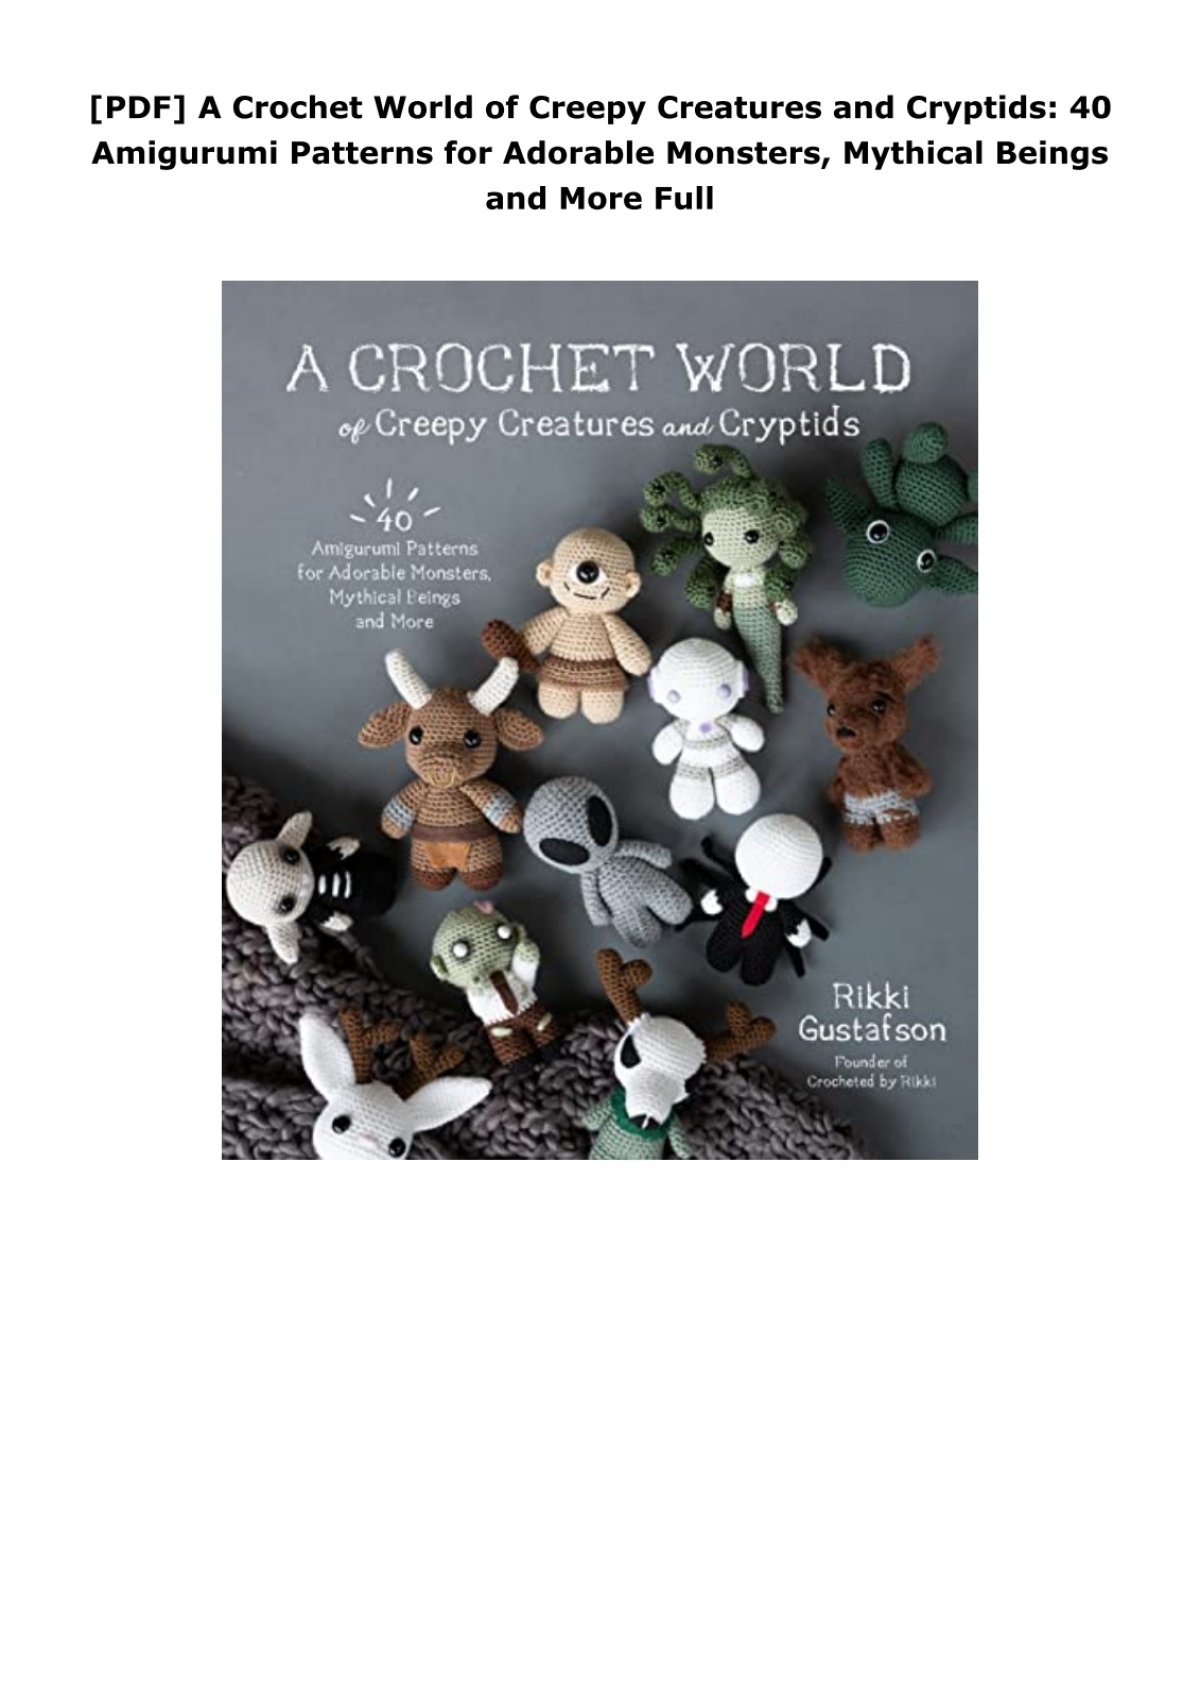 A crochet world of creepy creatures and cryptids